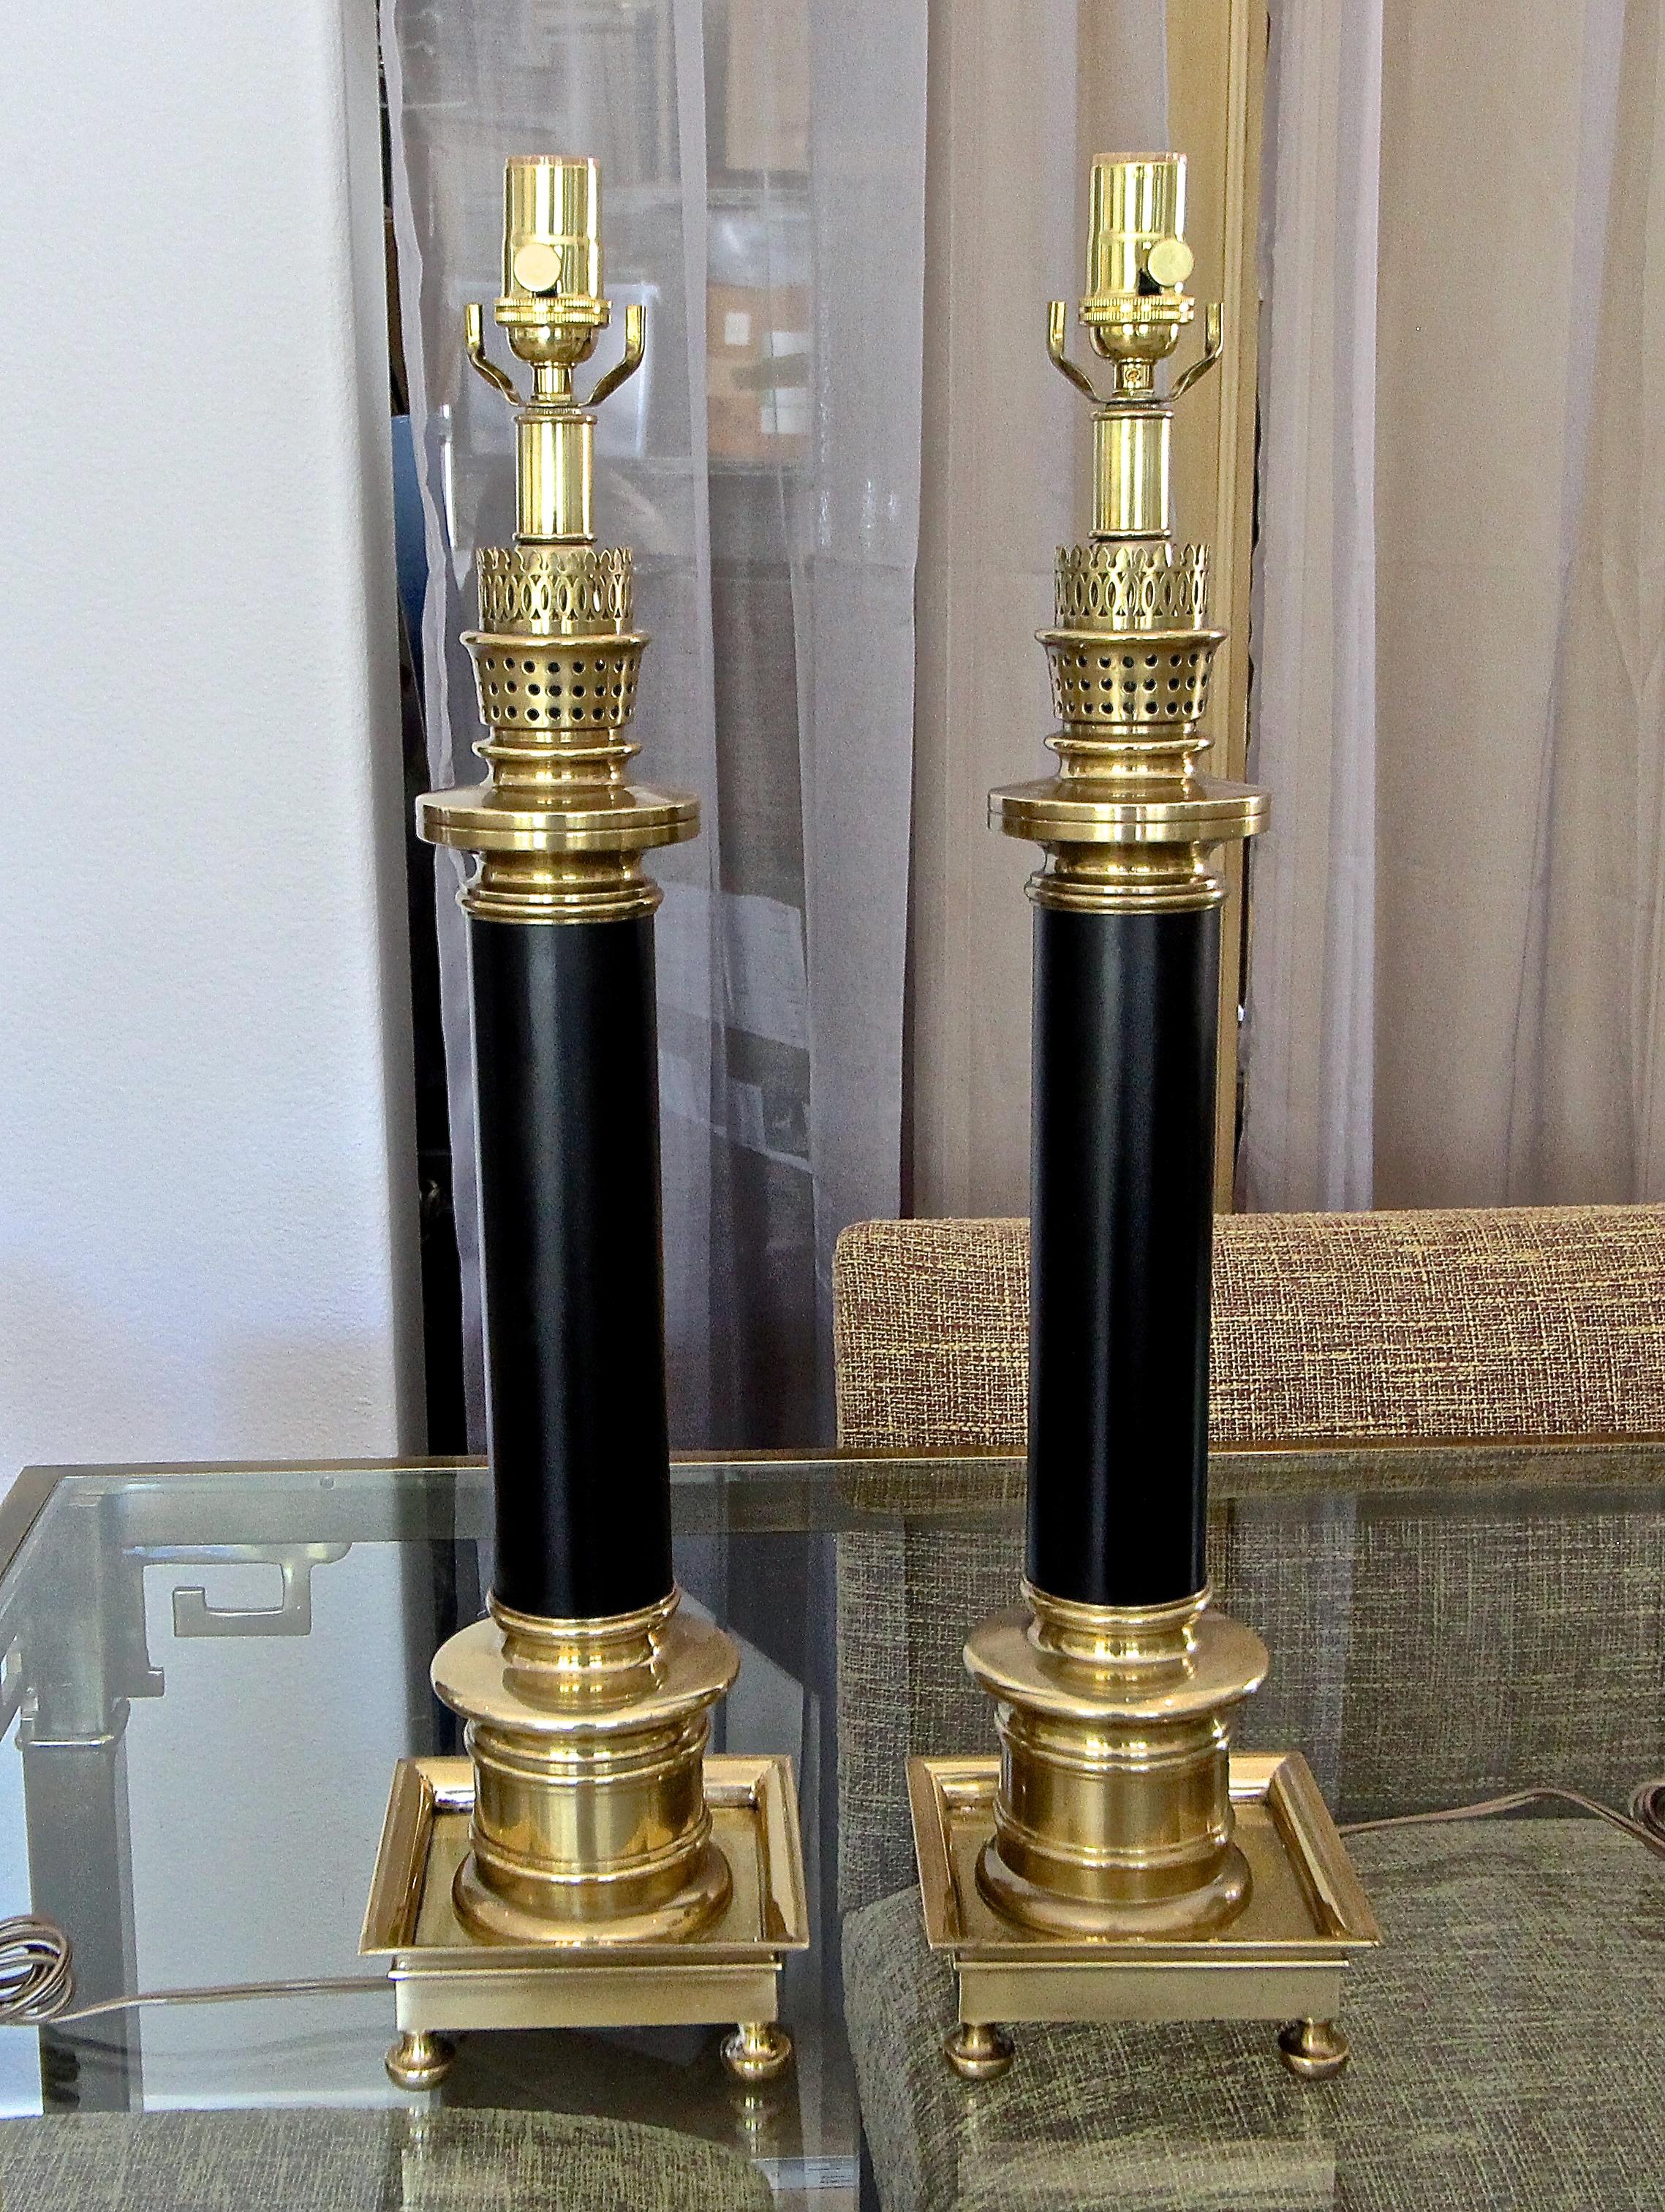 Pair of large solid brass and black painted column table lamps by Frederick Copper for Fitz & Floyd. Newly wired for US with new three-way brass sockets and cords. See photo of replaced socket showing Fredrick Cooper label. Includes original harps